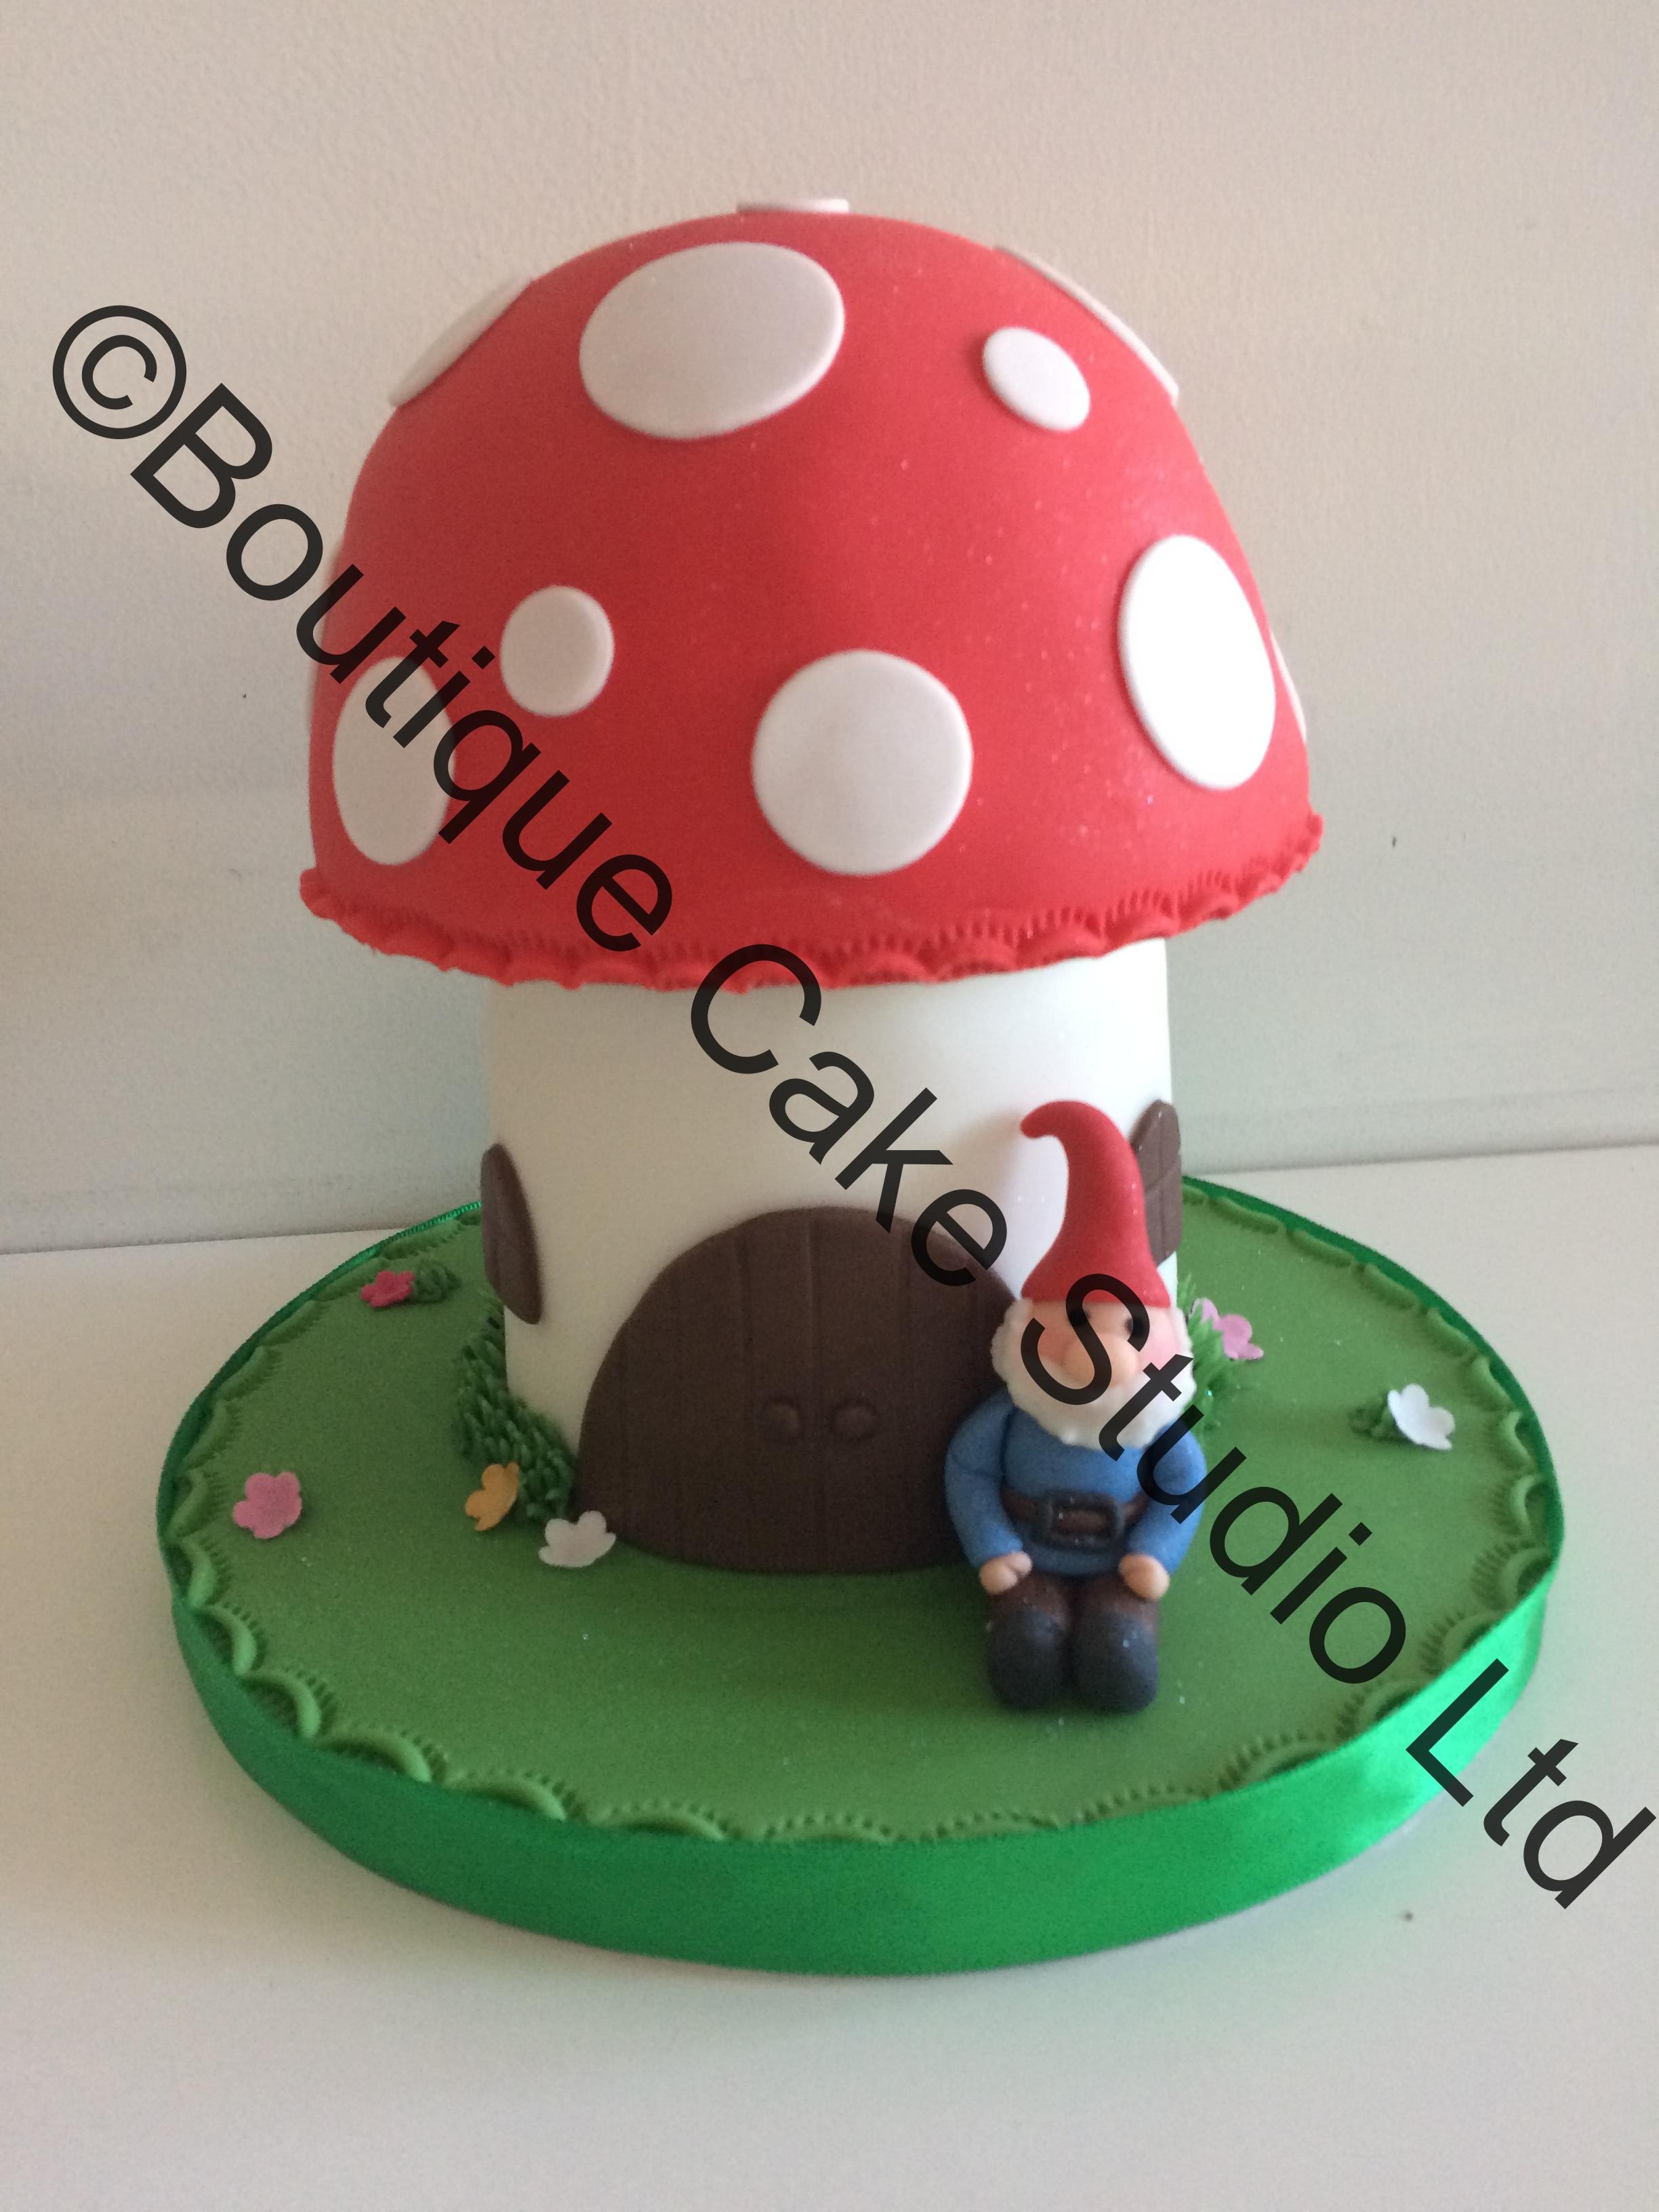 Toadstall and Gnome Cake